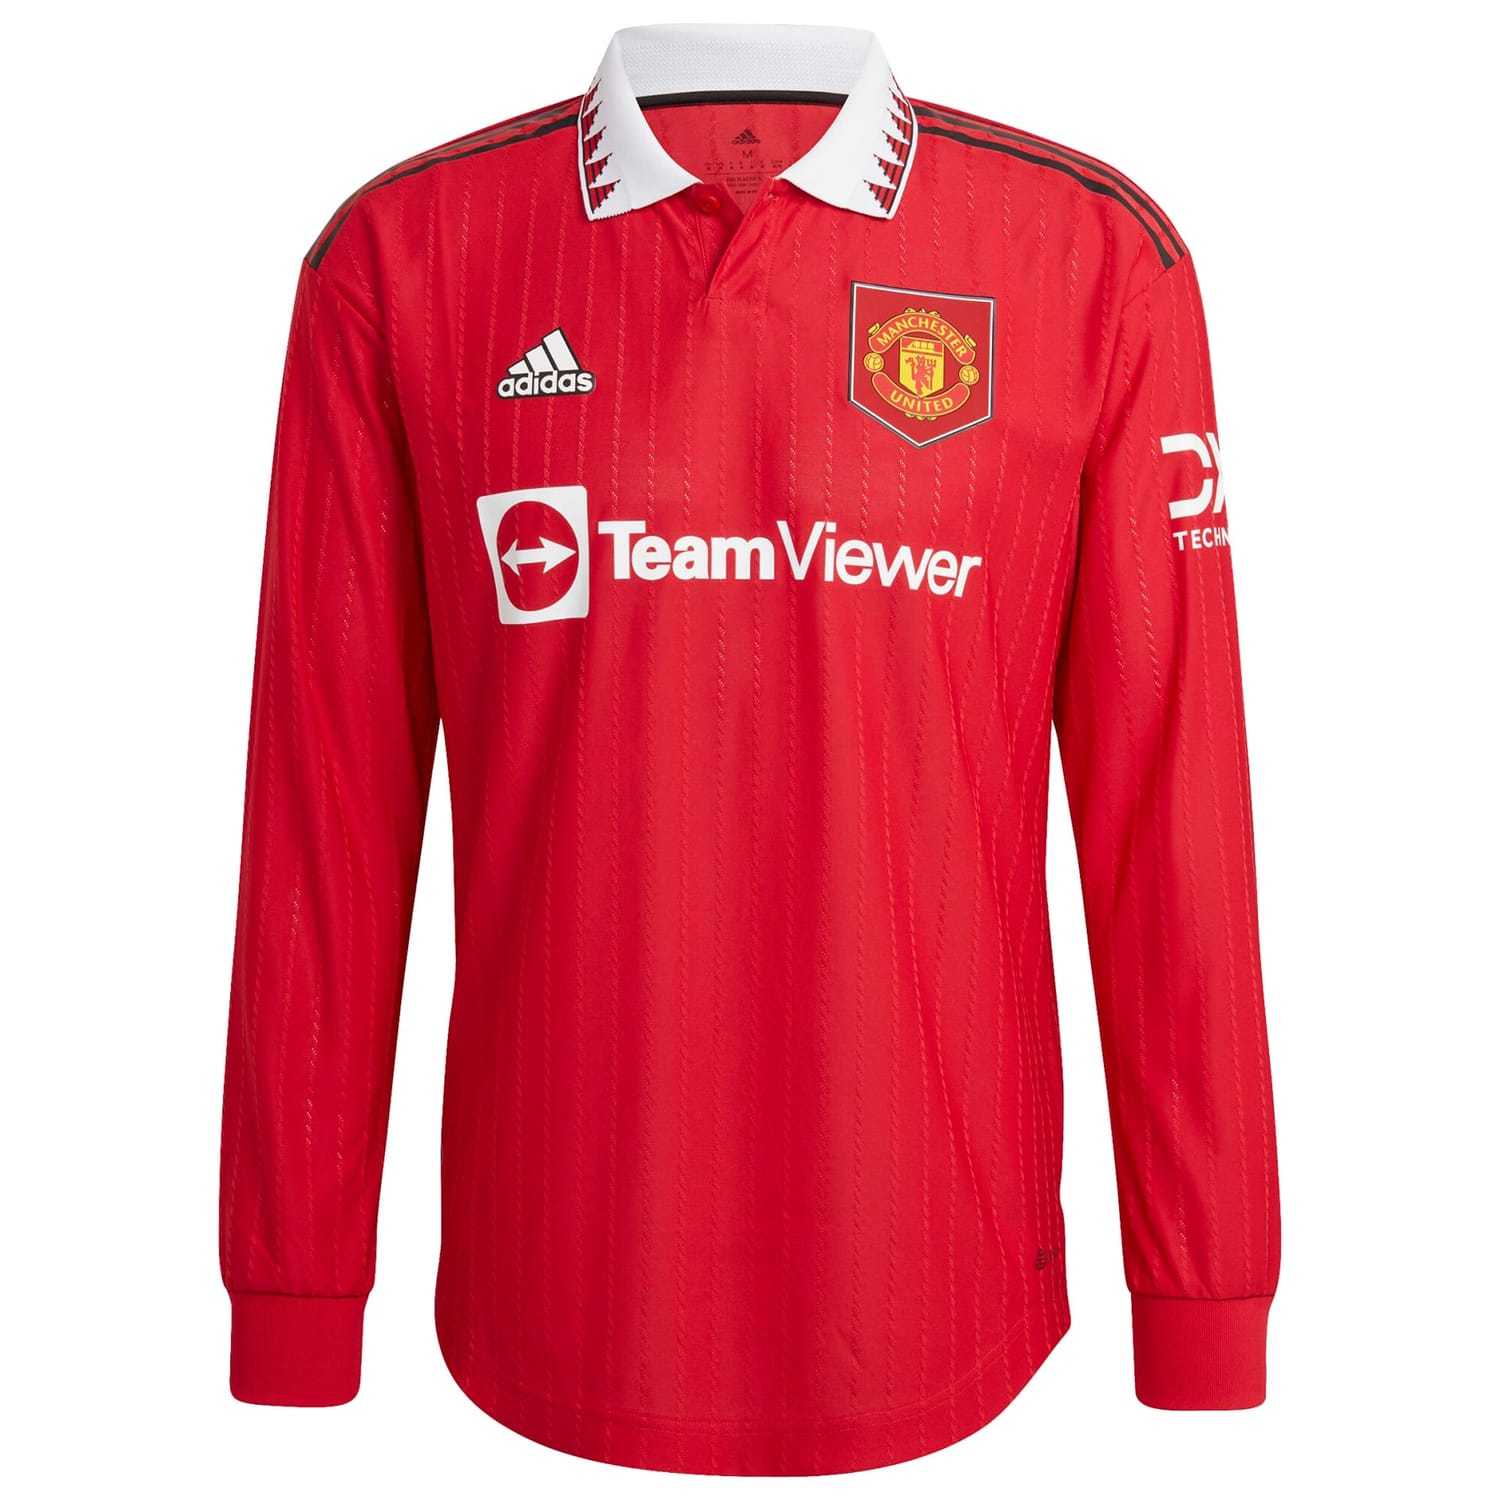 Premier League Manchester United Home Authentic Jersey Shirt Long Sleeve 2022-23 player Tyrell Malacia 12 printing for Men